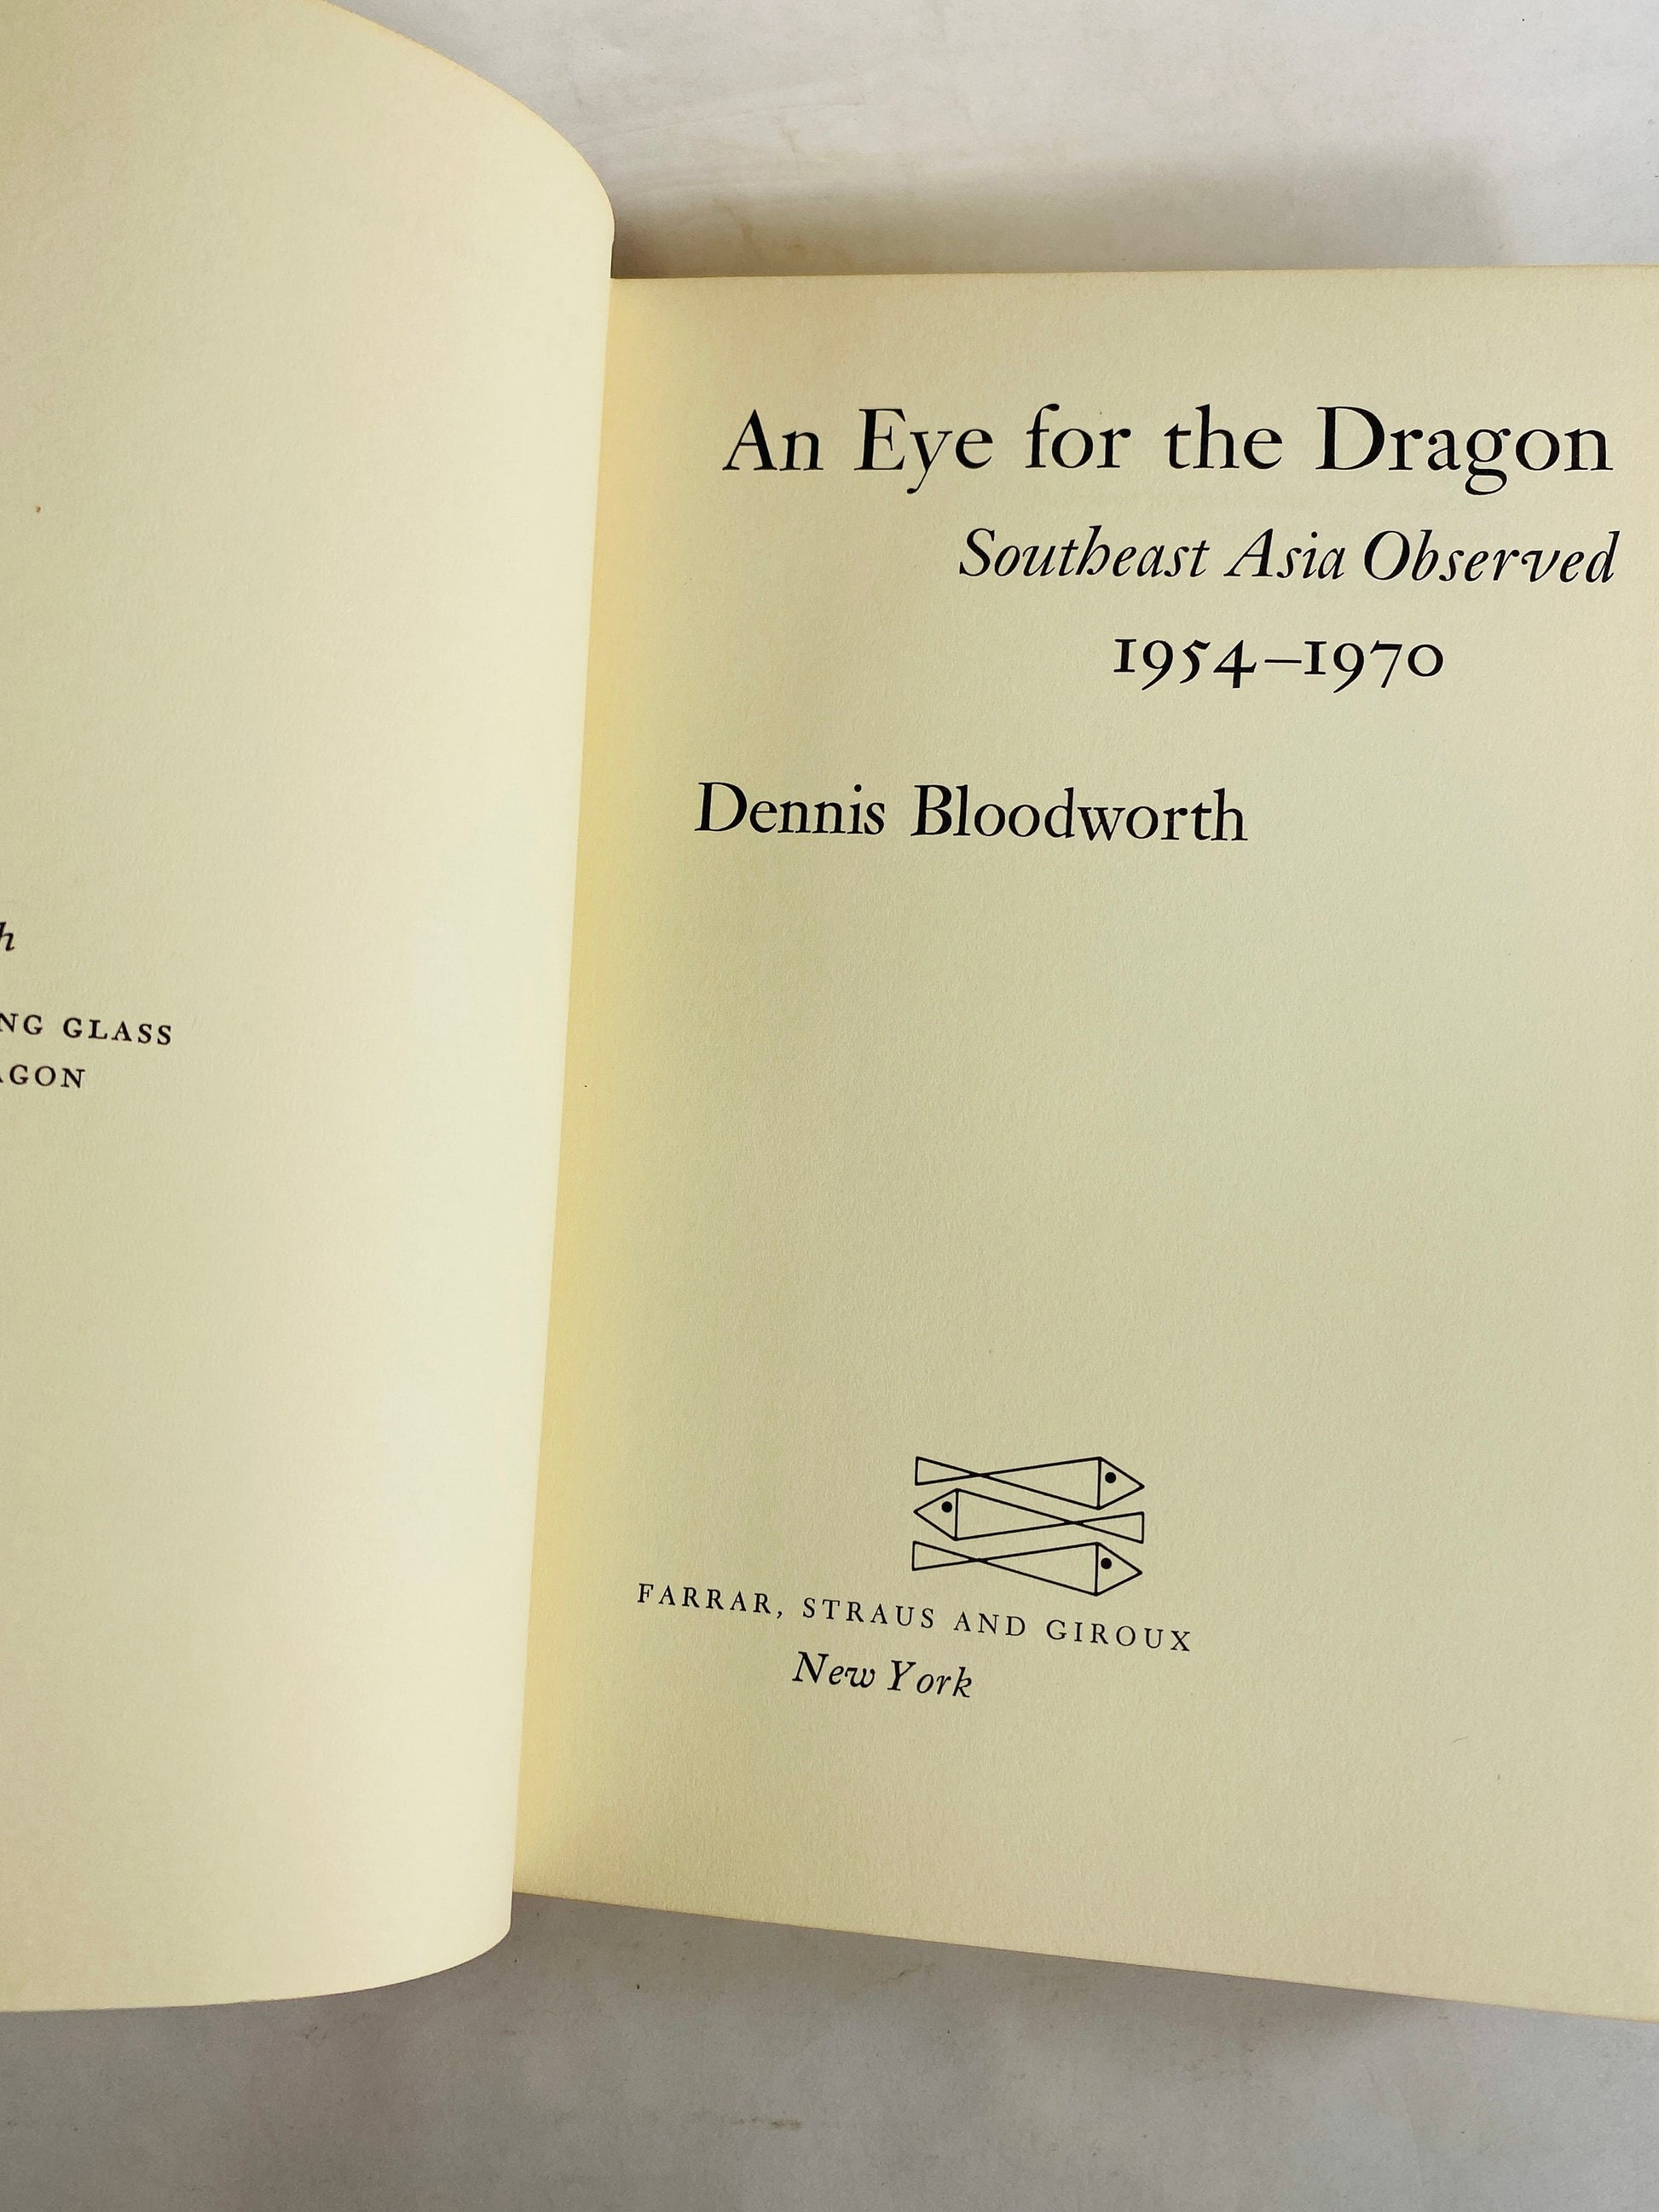 1970 An Eye for the Dragon sequel to Chinese Looking Glass FIRST EDITION vintage book by Dennis Bloodworth Book lover gift